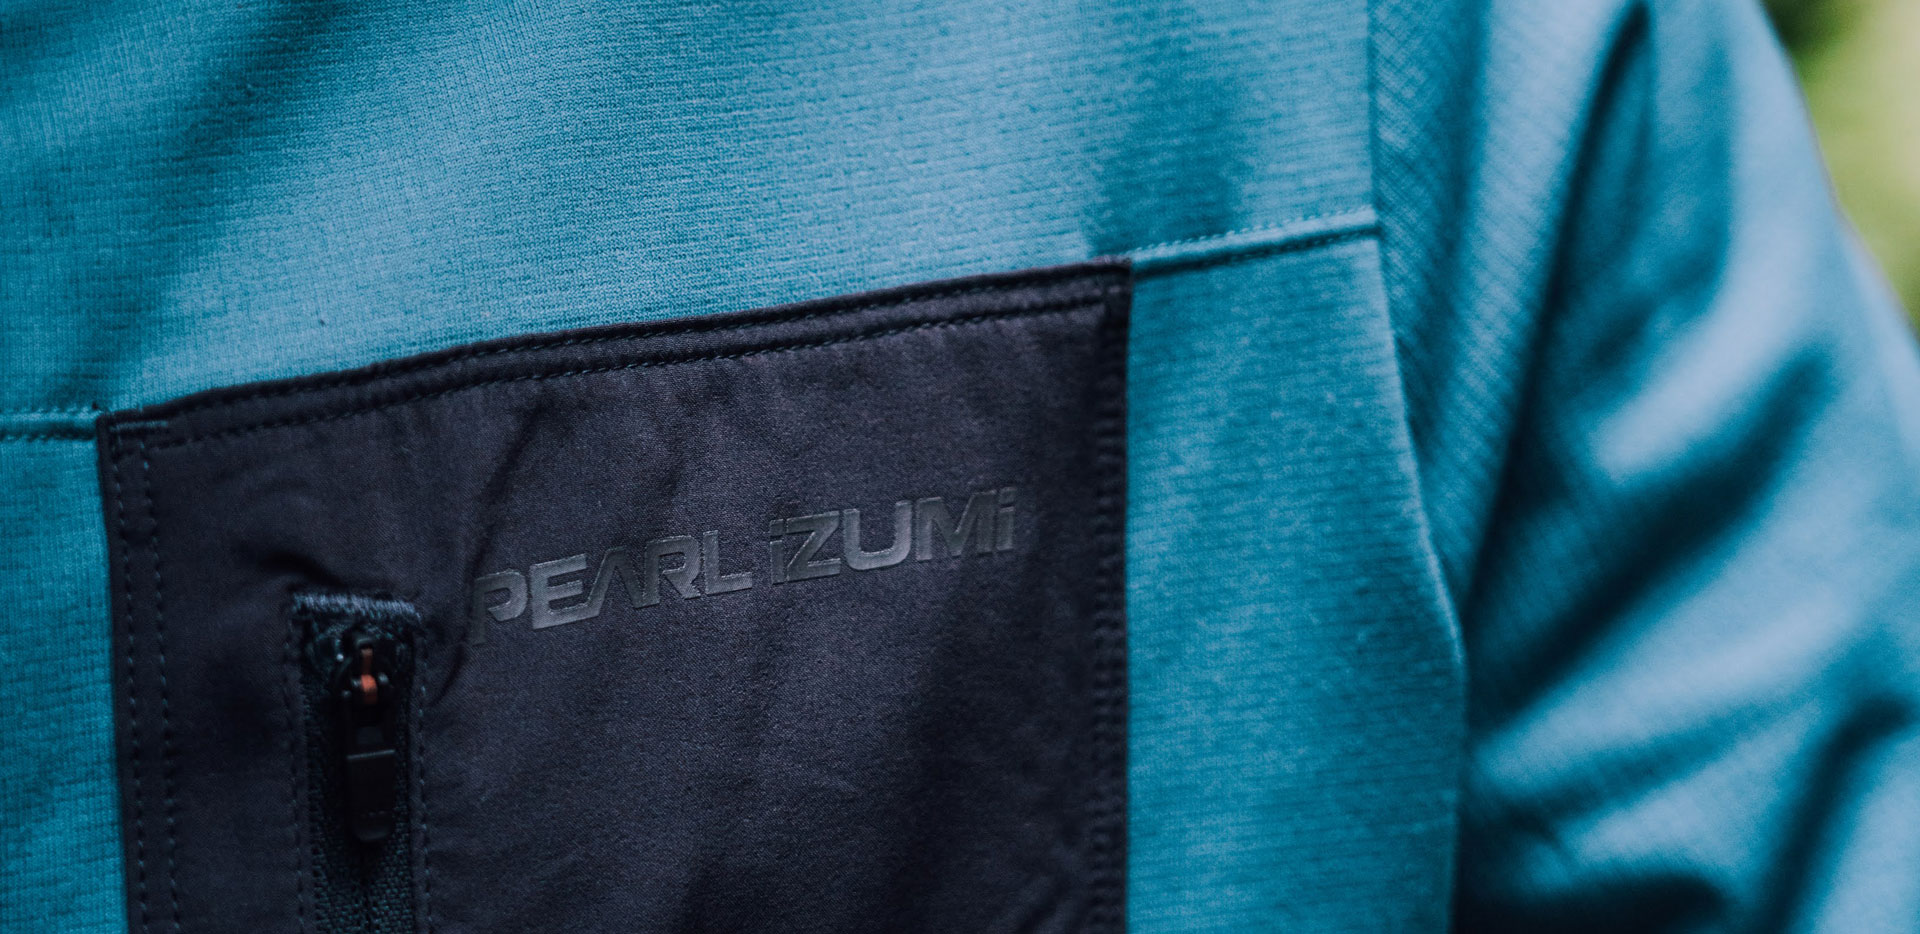 Pearl Izumi Fall Collection Review